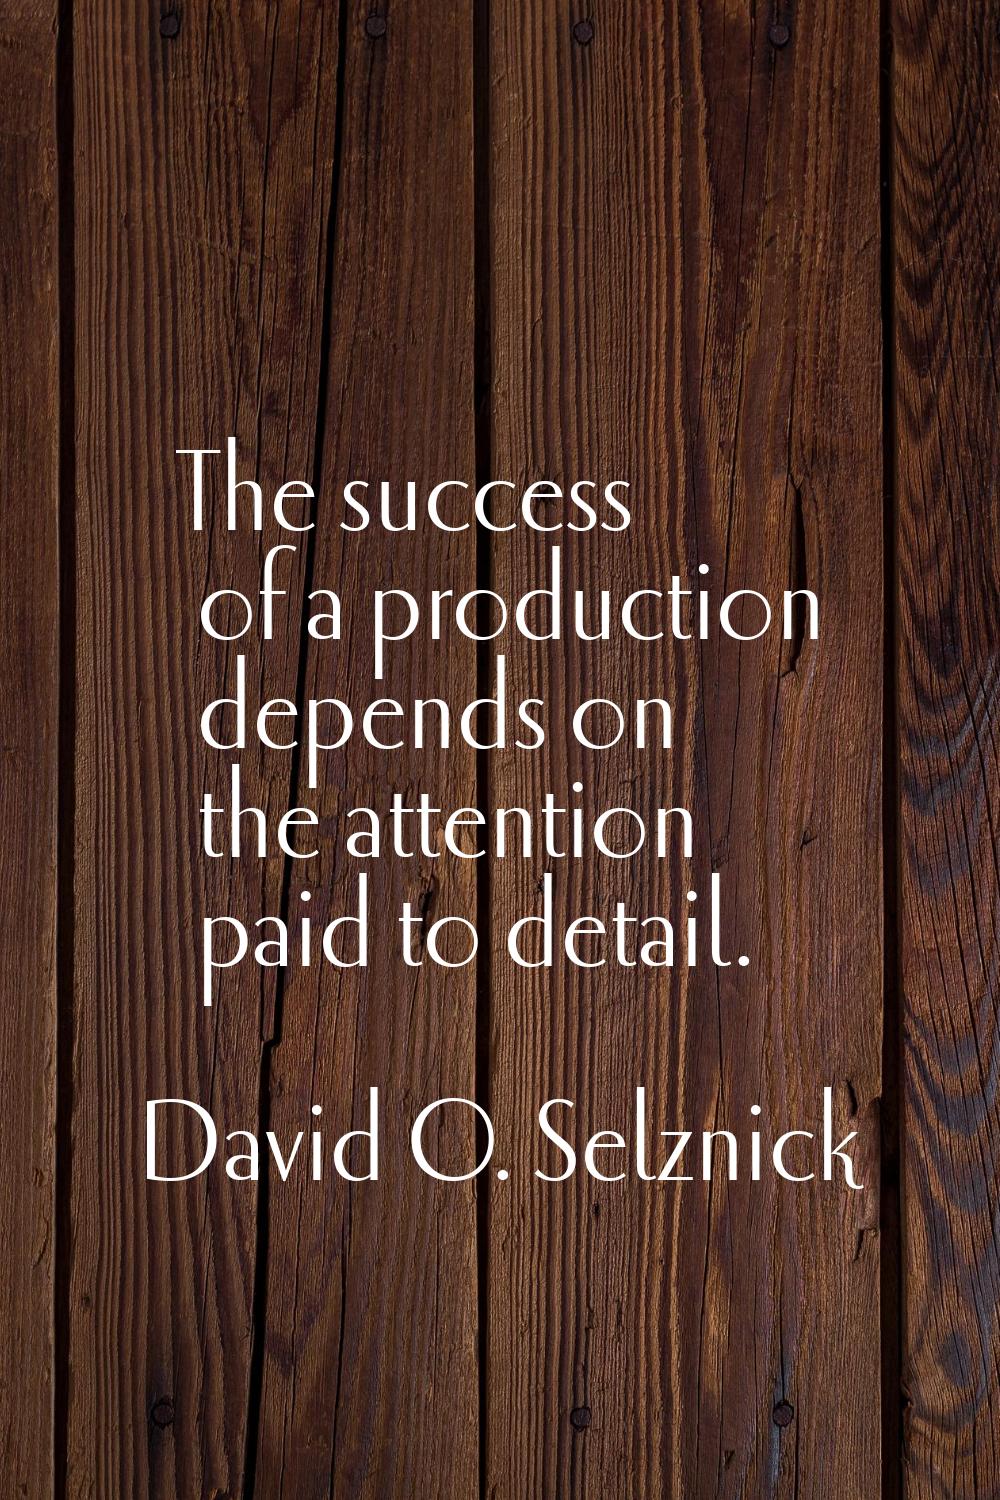 The success of a production depends on the attention paid to detail.